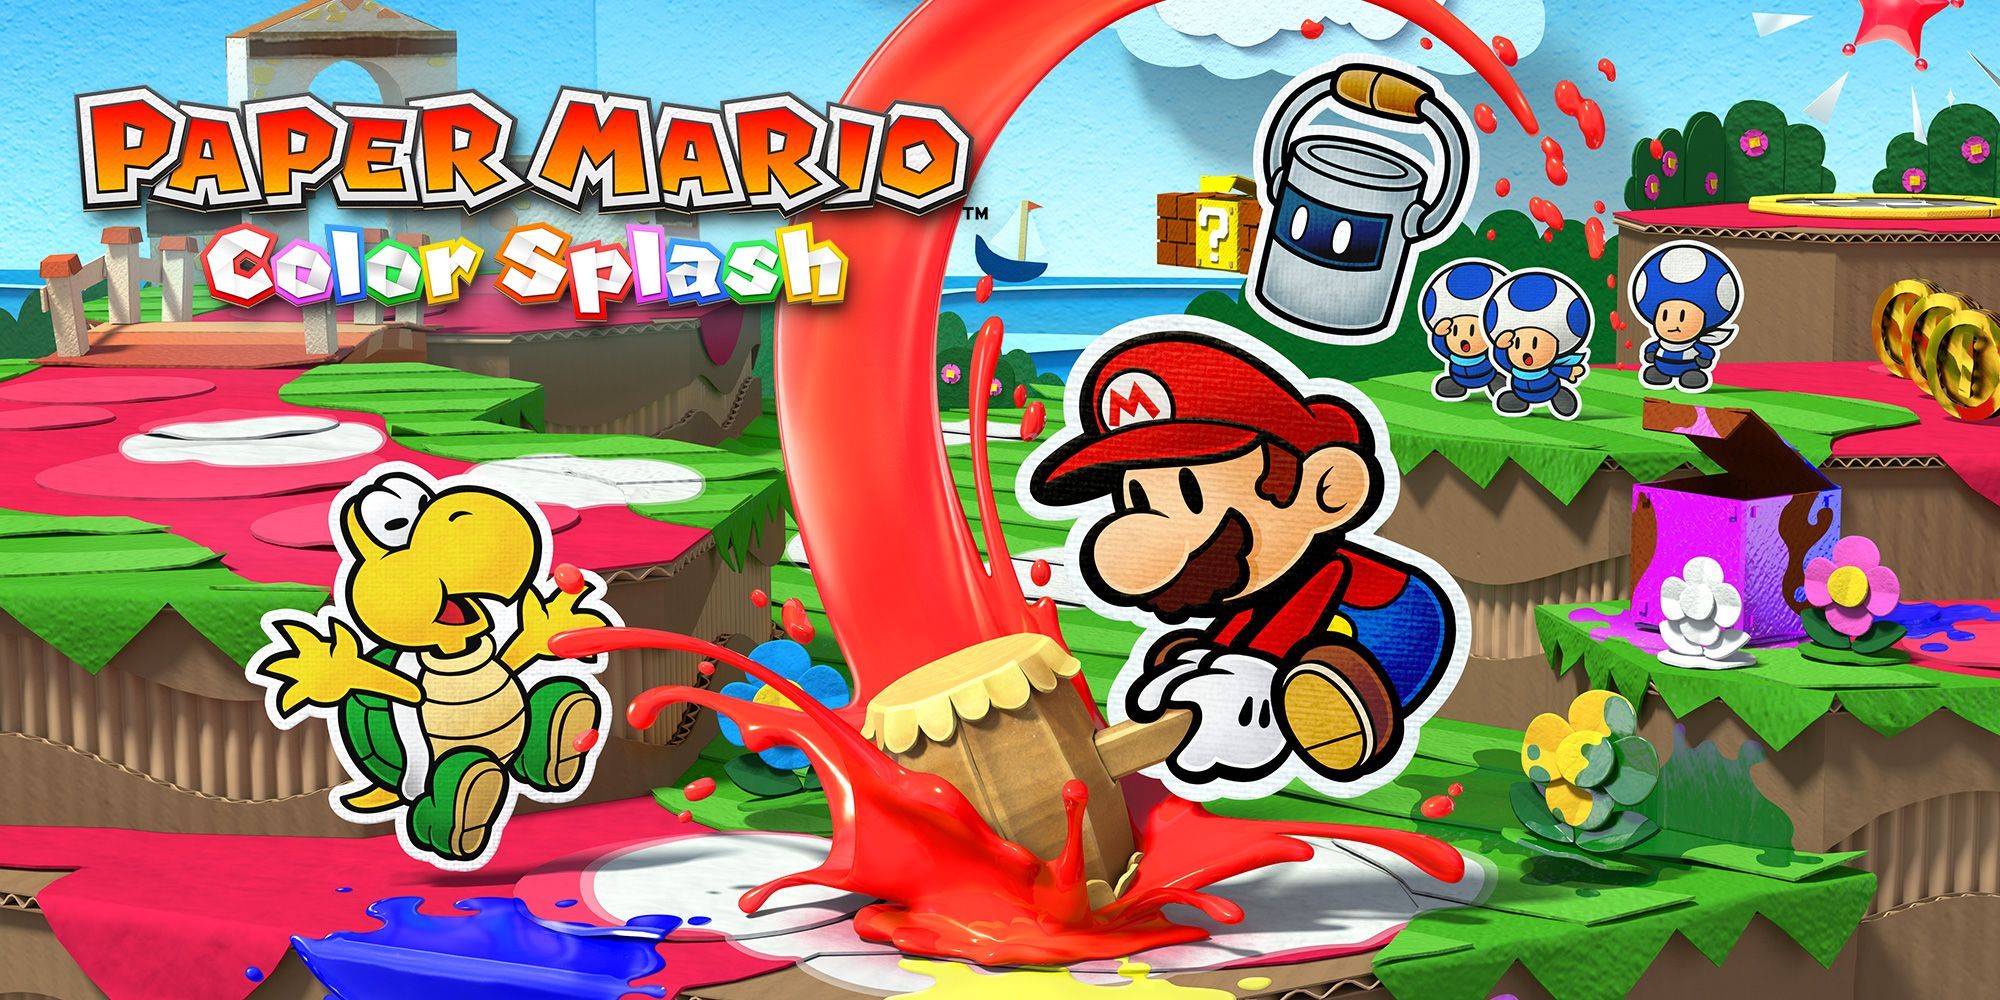 Mario hitting red paint with a mallet onto Koopa in promotional art for Paper Mario Color Splash